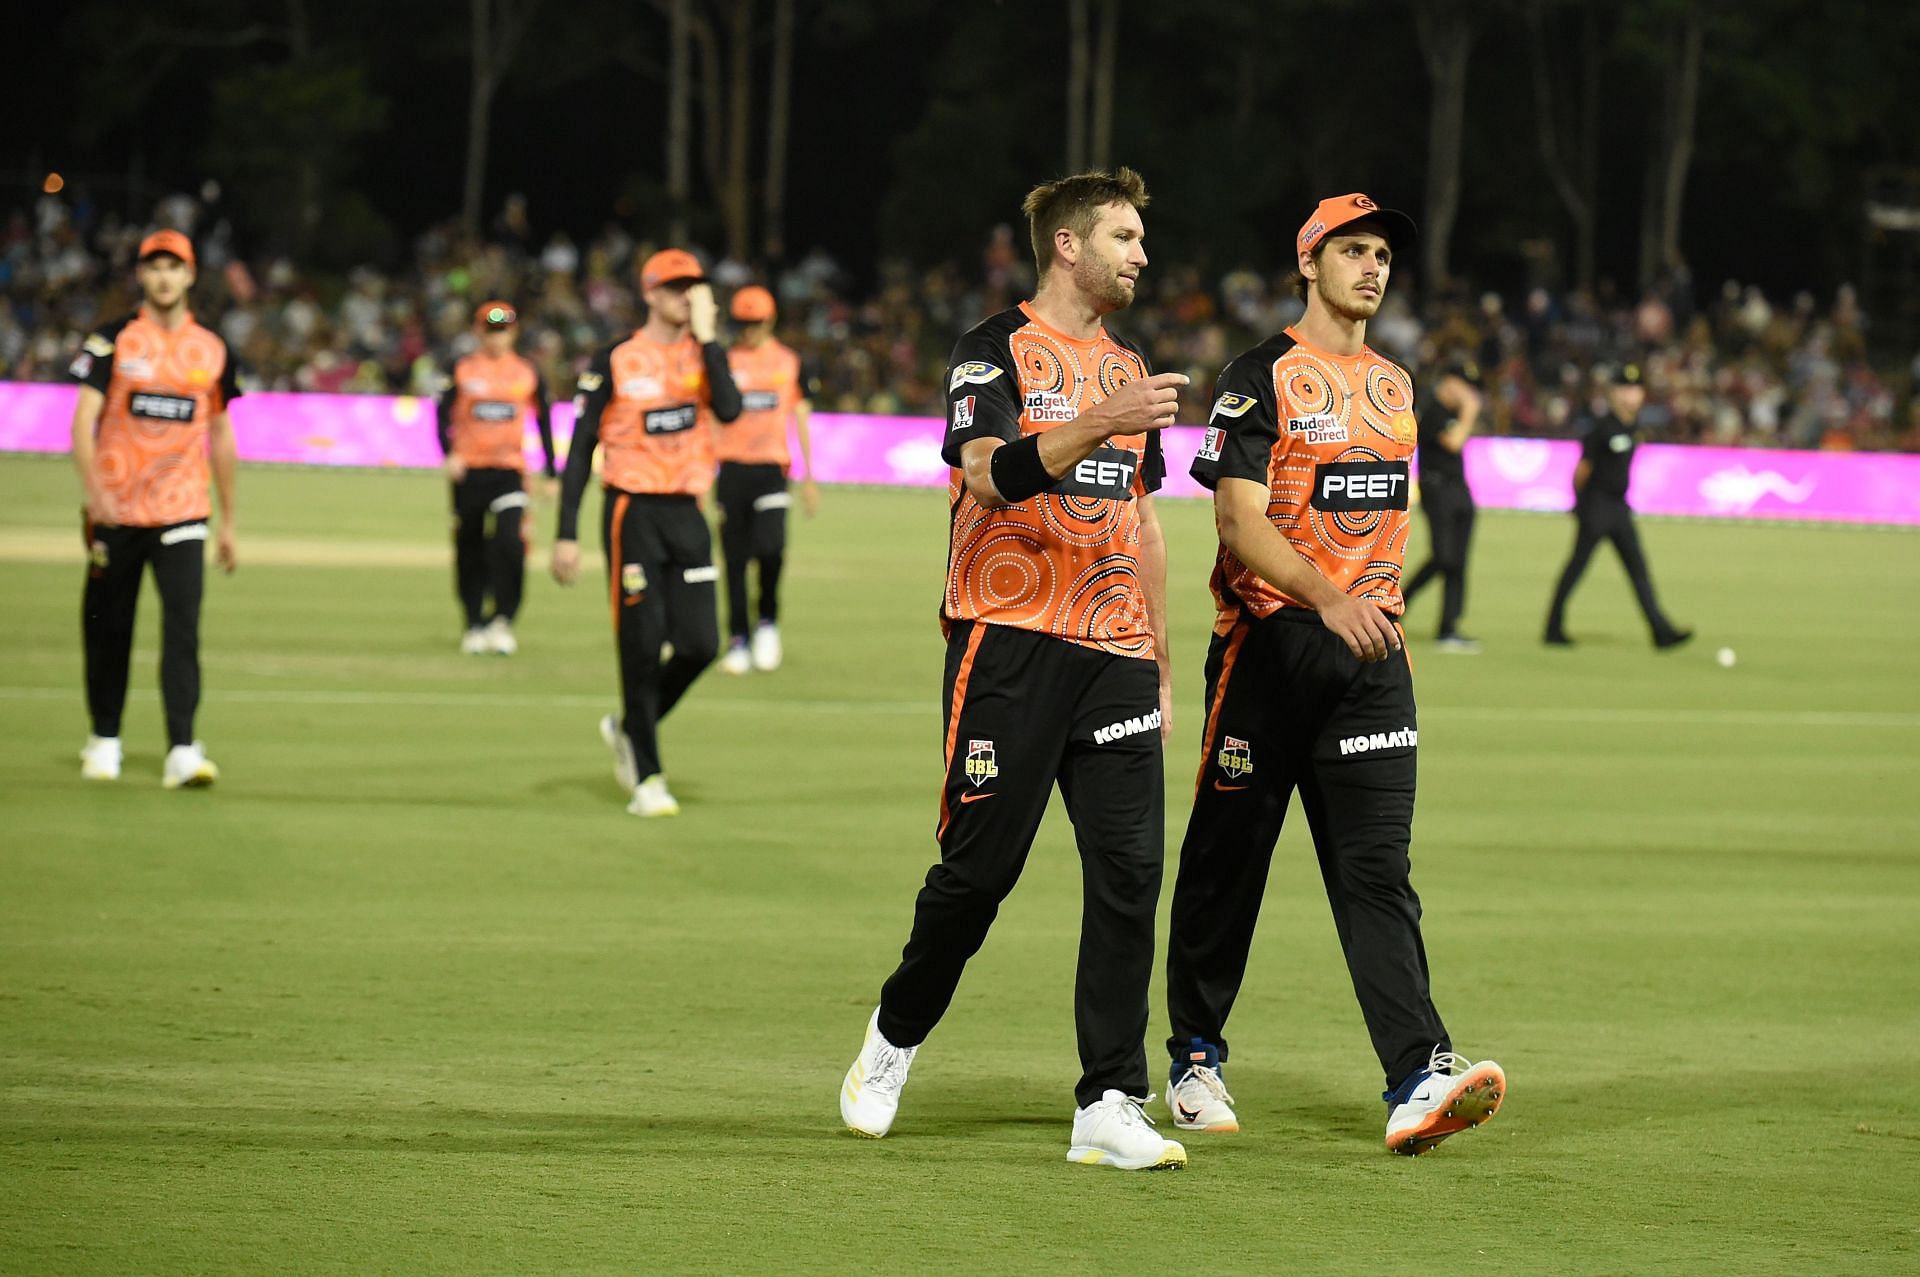 The Scorchers will be looking to get a win under thier belt.